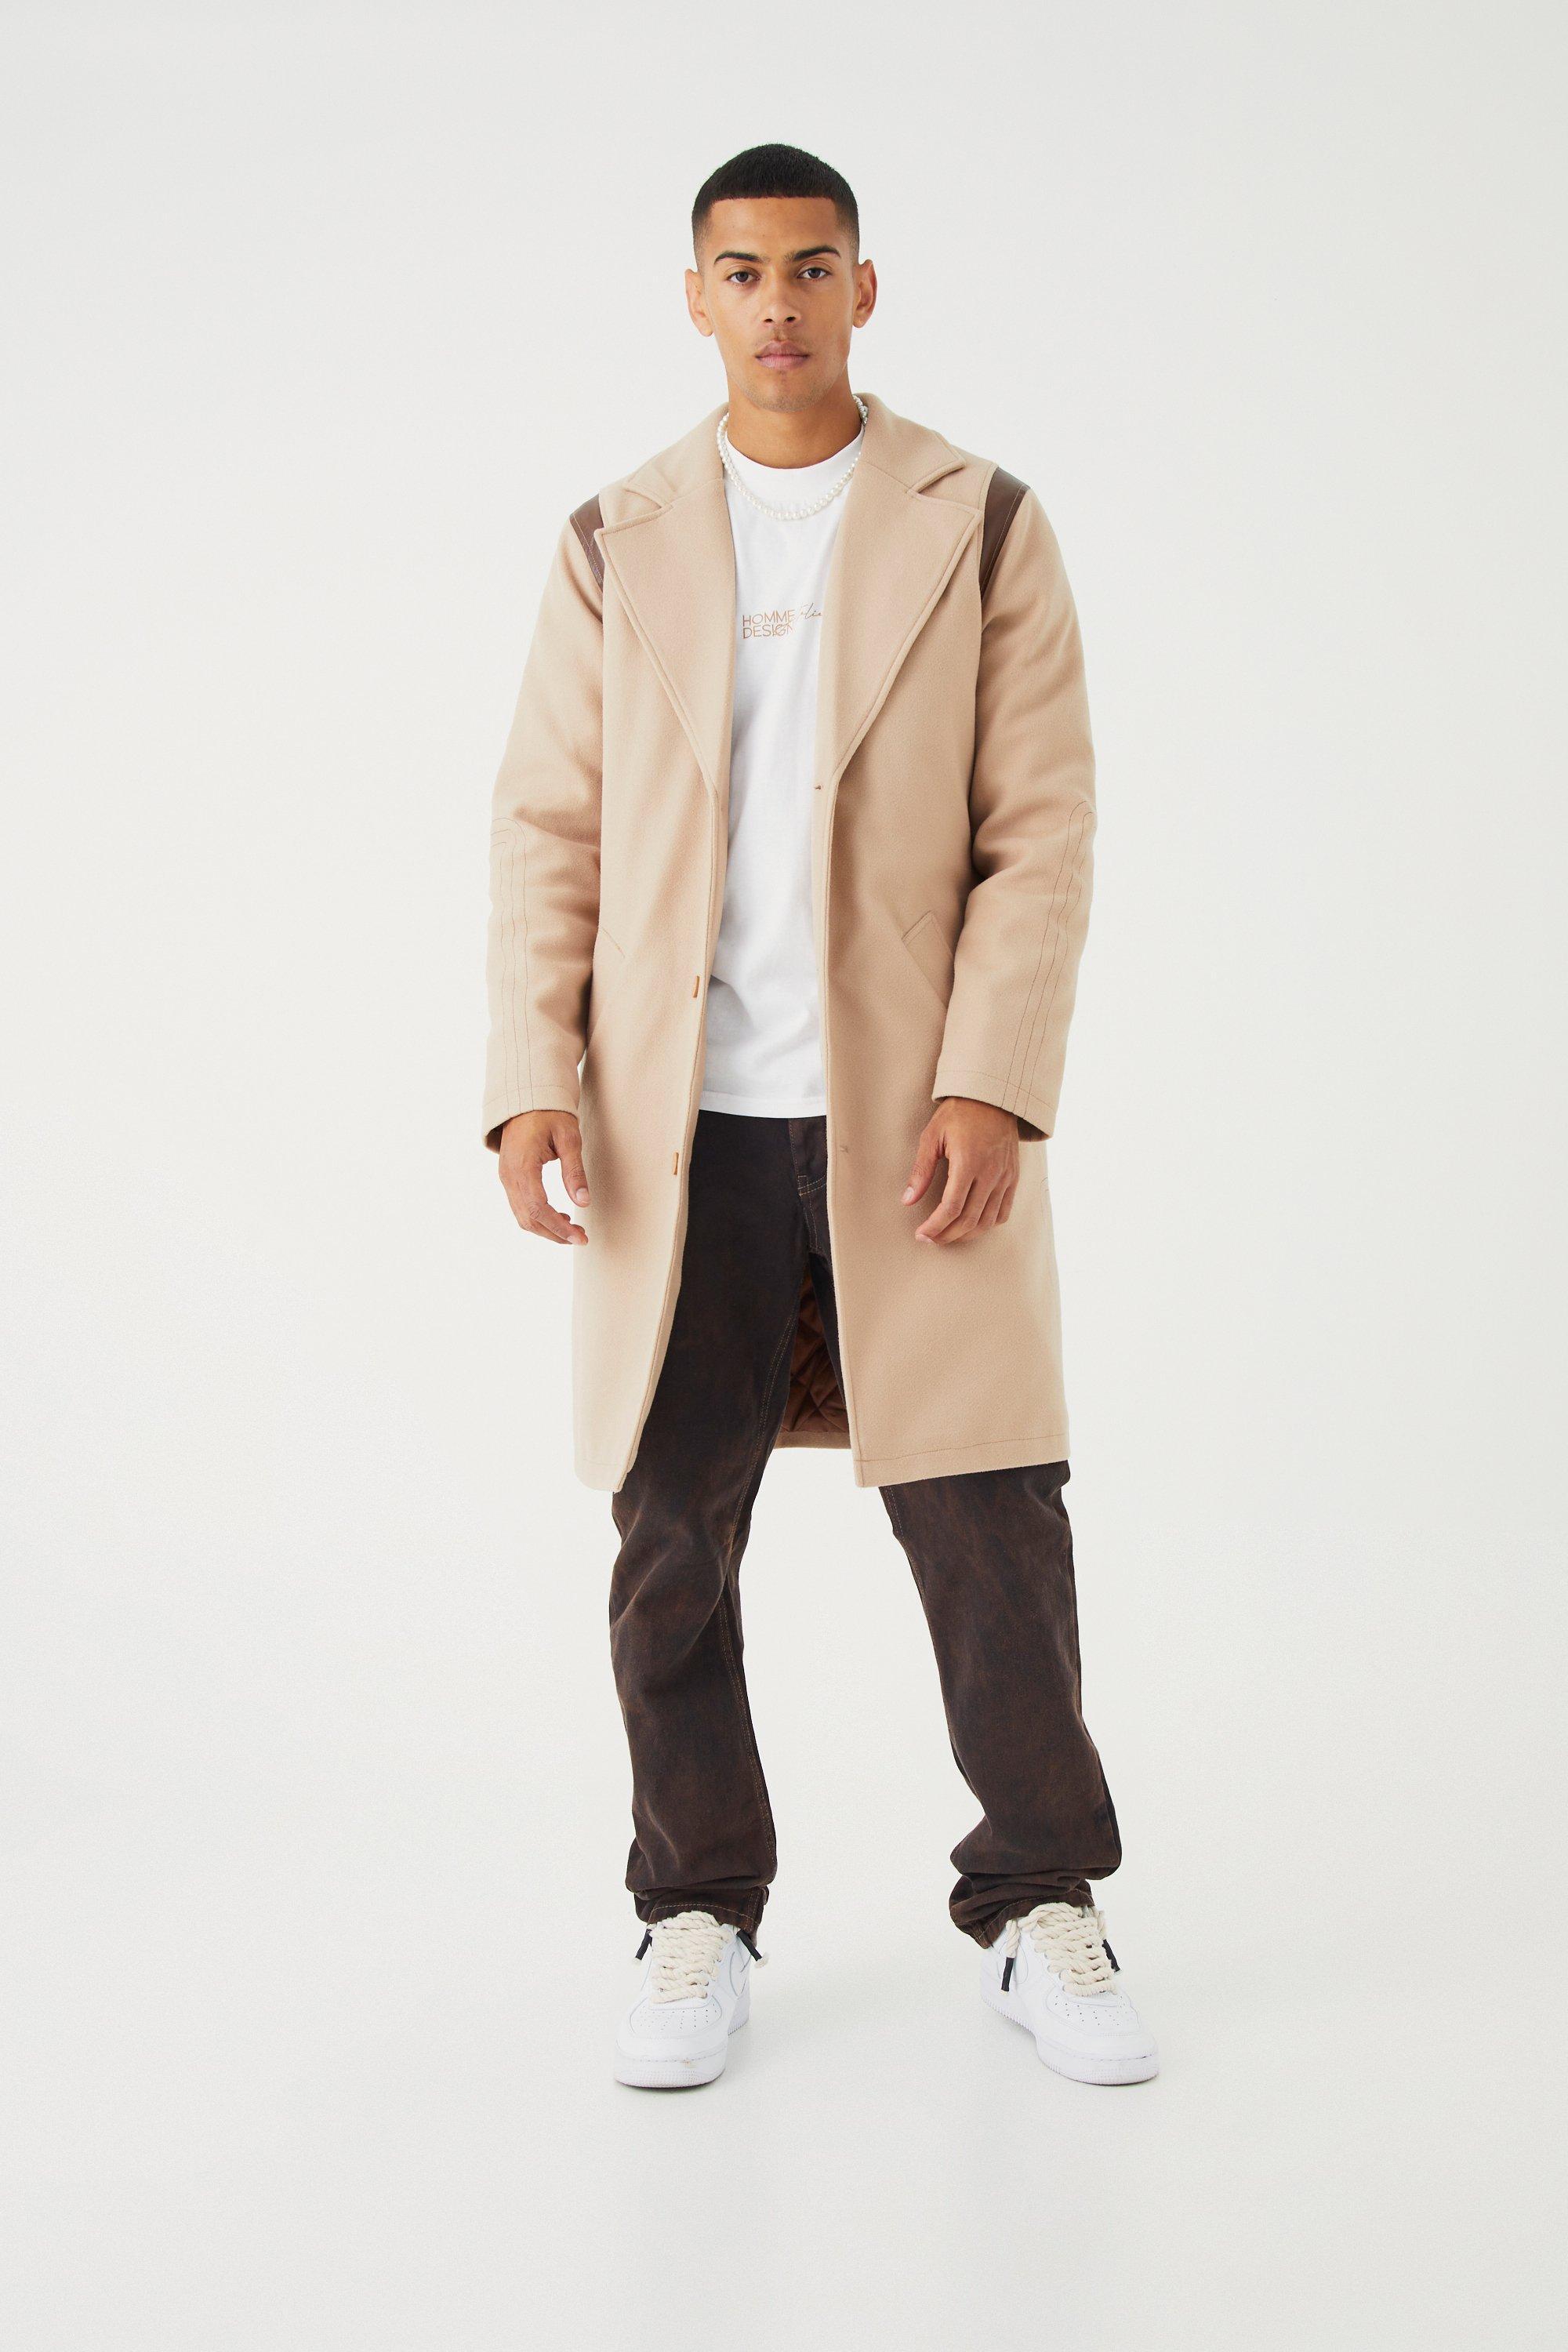 BoohooMAN Single Breasted Melton Overcoat With Pu in Natural for Men | Lyst